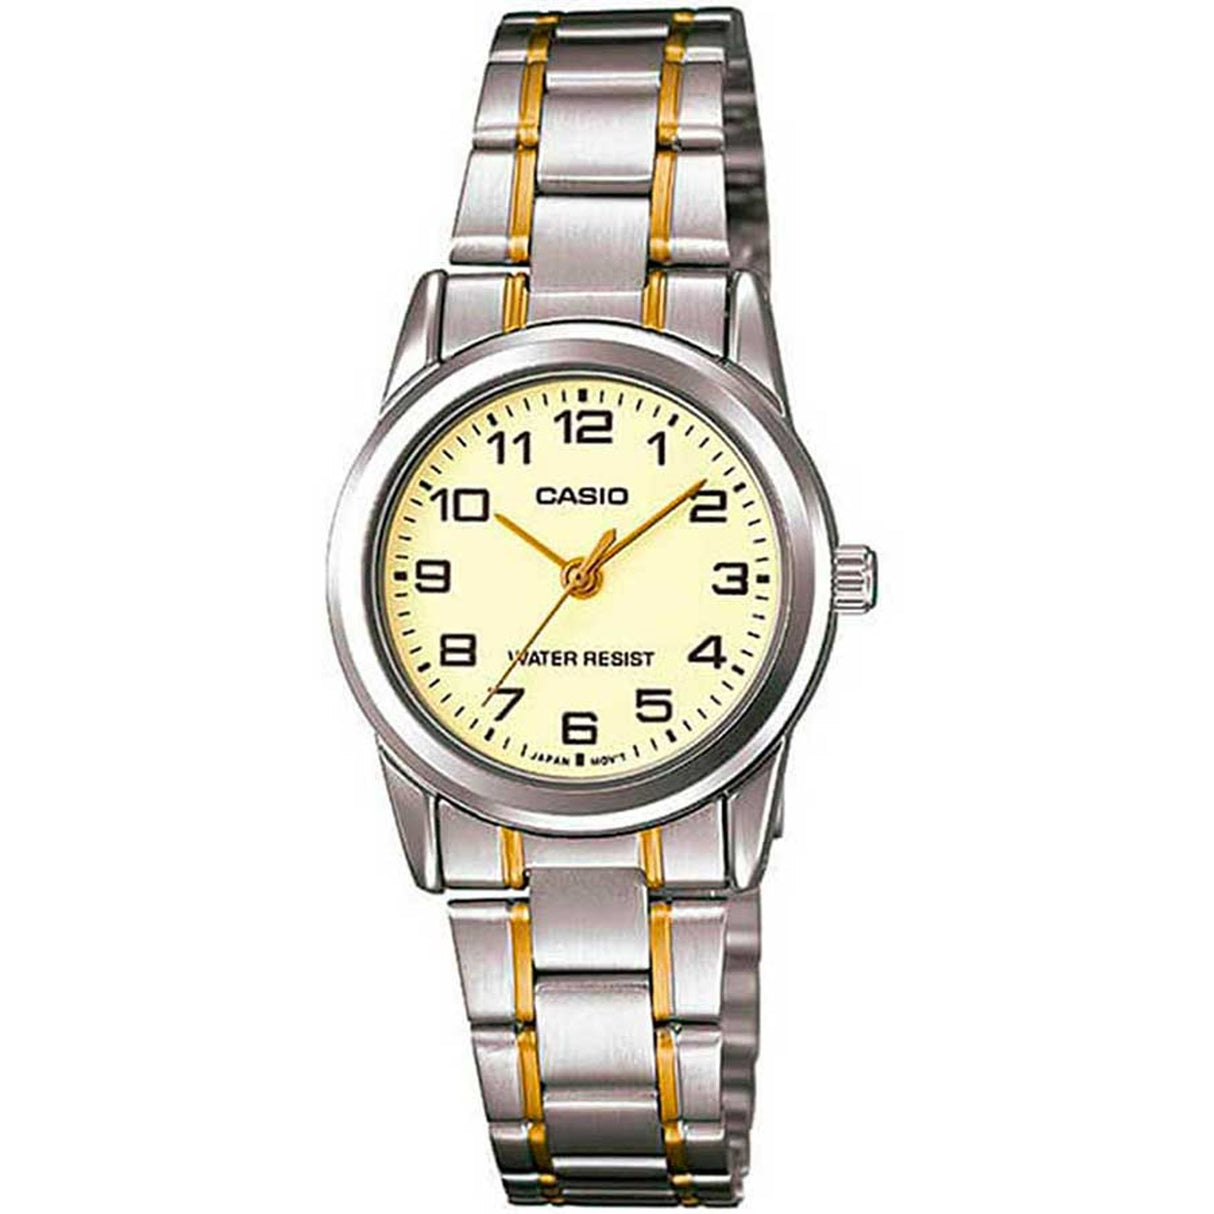 Casio women's watch 25mm case size Three-hand analog display Quartz movement Stainless steel strap Deployante clasp Classic design Easy to read Durable Original packaging (gift-ready)